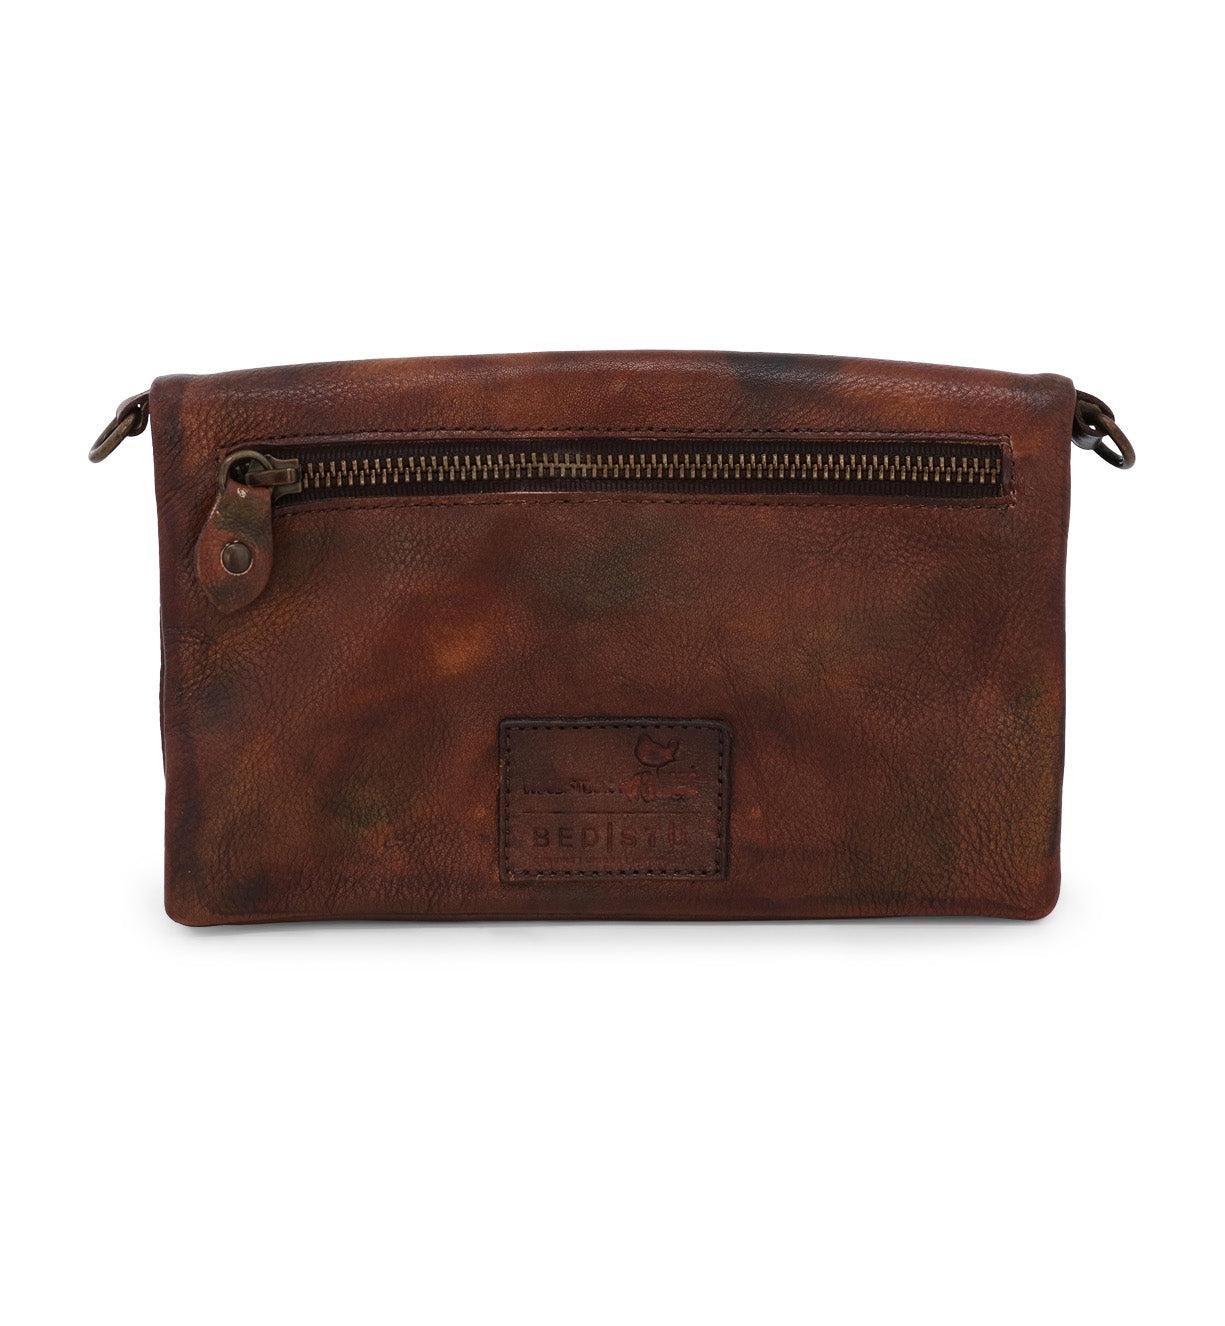 A brown leather Cadence bag from Bed Stu with a zipper.